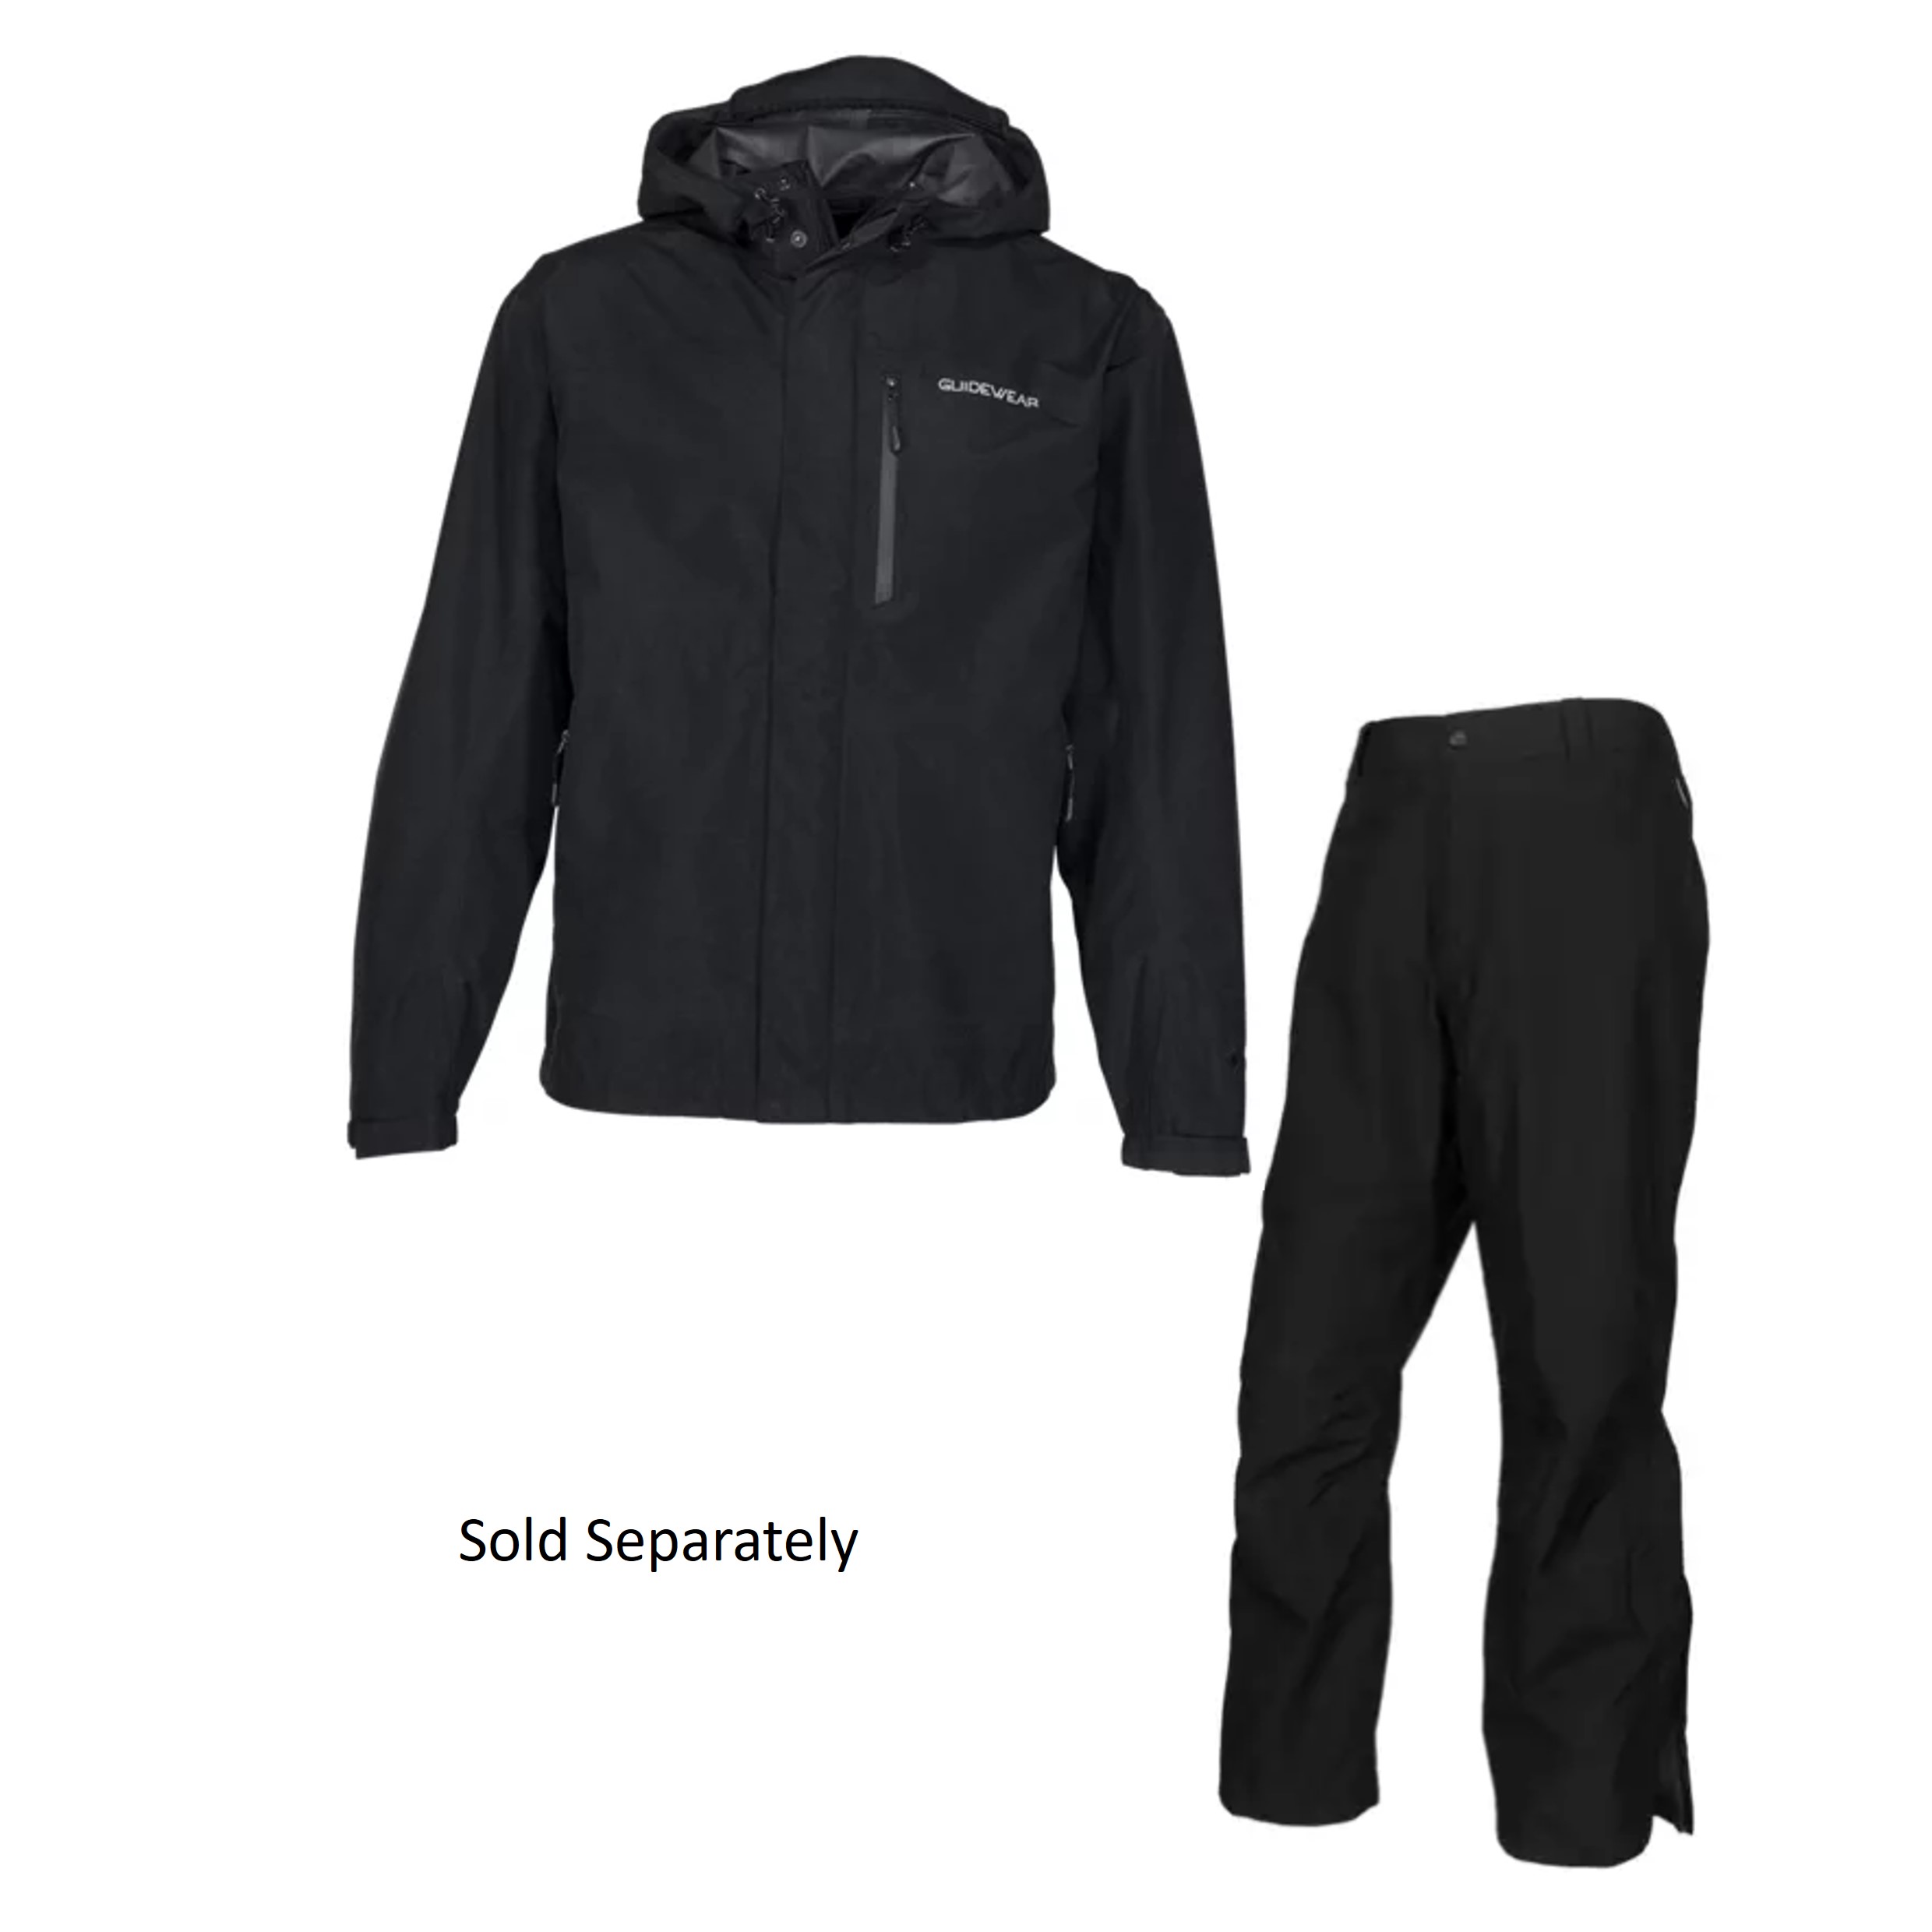 Read more about the article Guidewear – Rainy River Parka & Pants with GORE-TEX PacLite